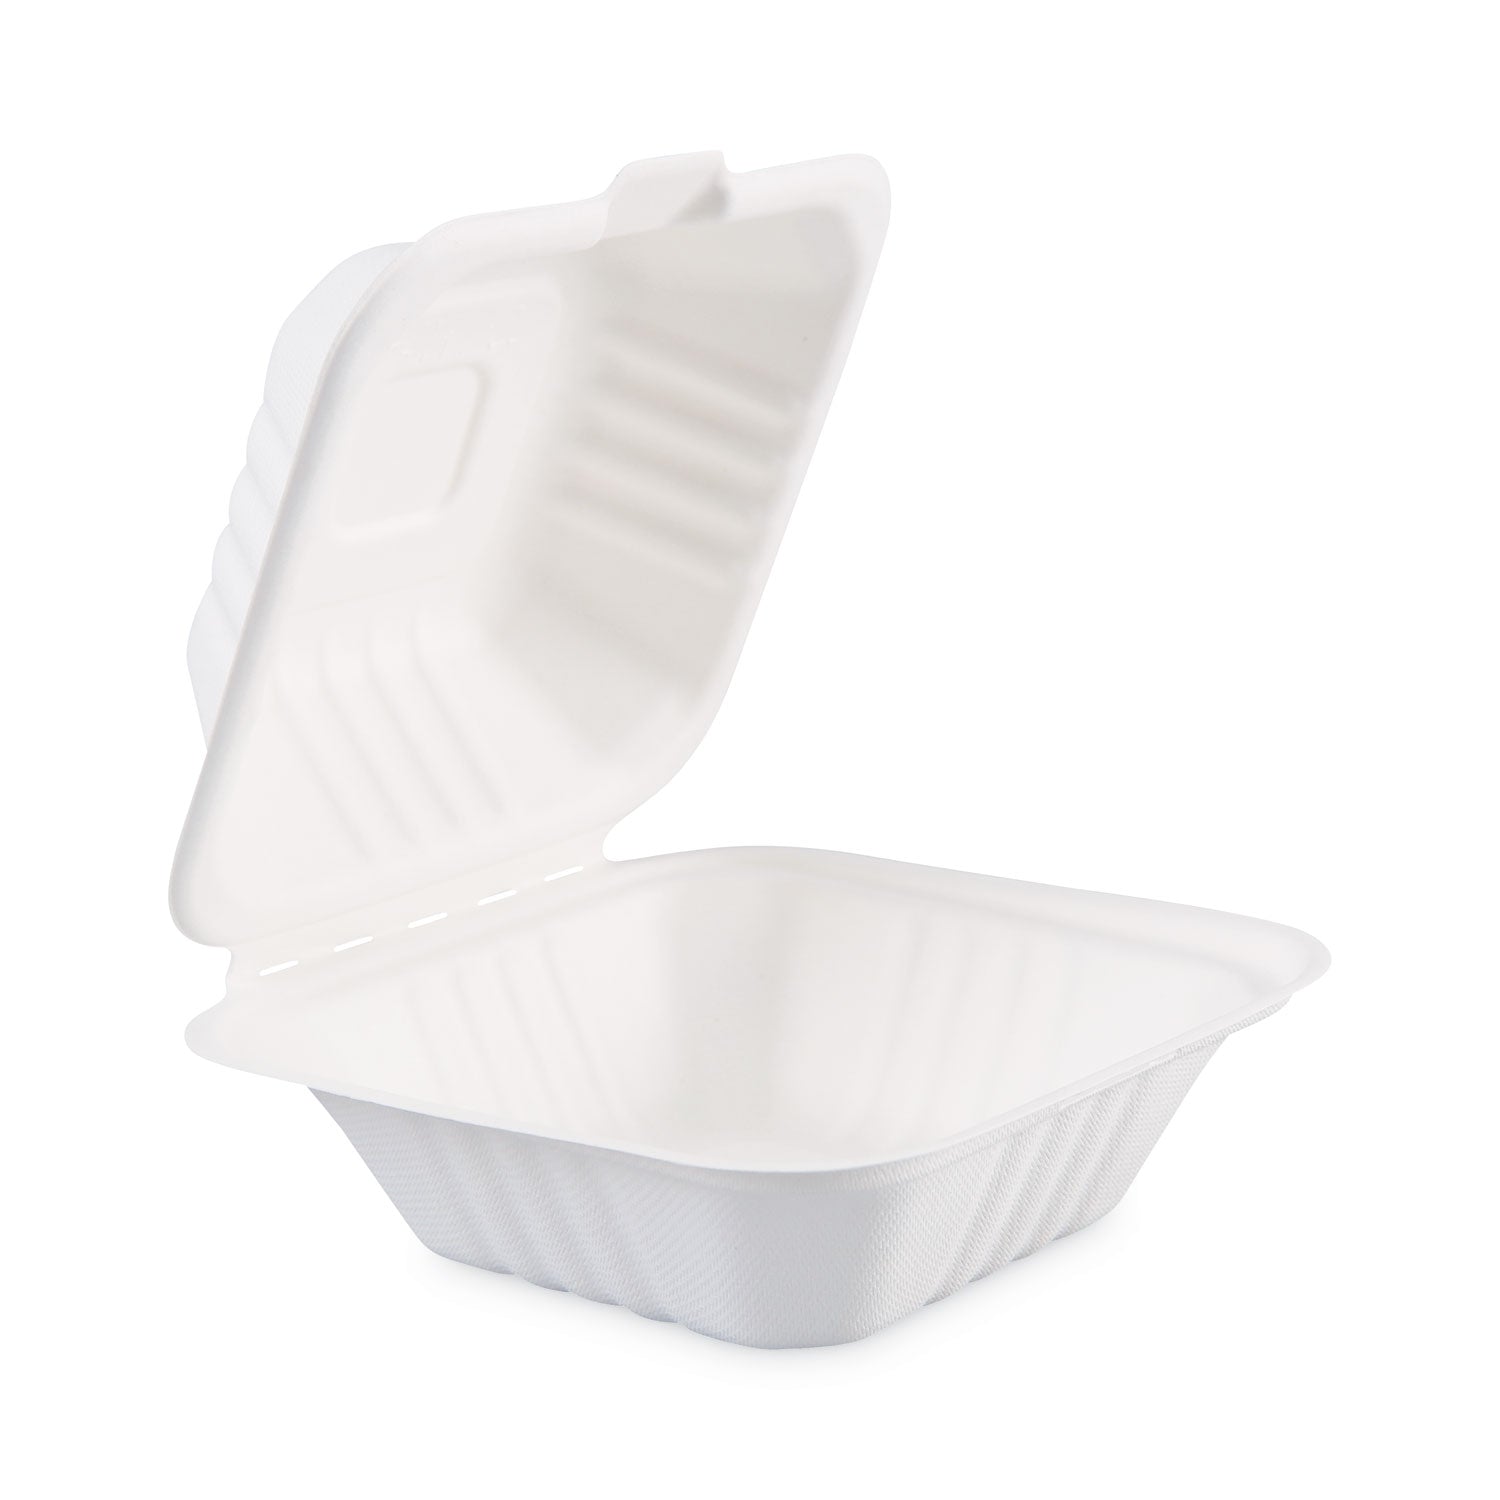 bagasse-food-containers-hinged-lid-1-compartment-6-x-6-x-319-white-sugarcane-125-sleeve-4-sleeves-carton_bwkhingewf1cm6 - 1